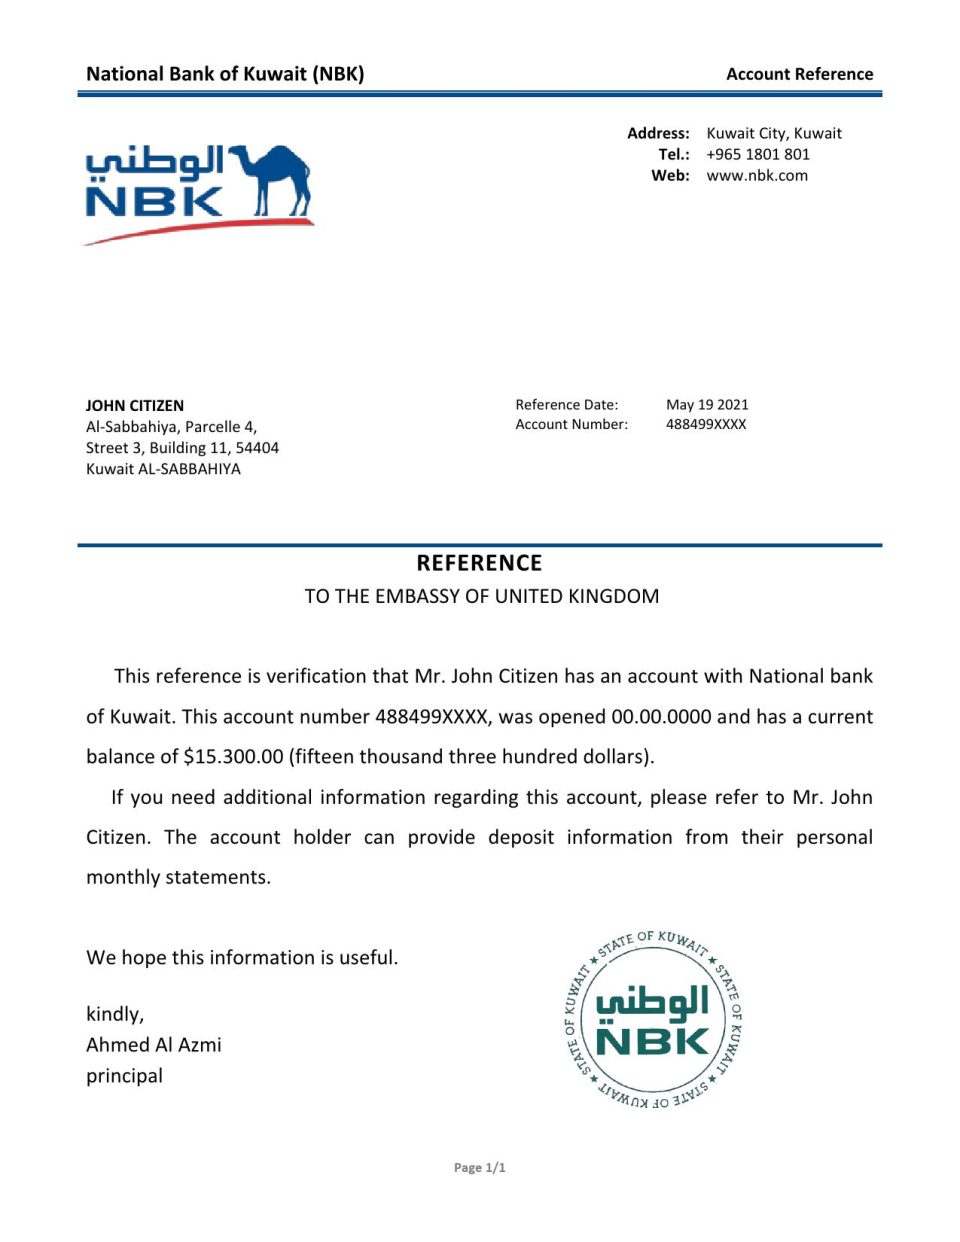 Download Kuwait National Bank of Kuwait Bank Reference Letter Templates | Editable Word